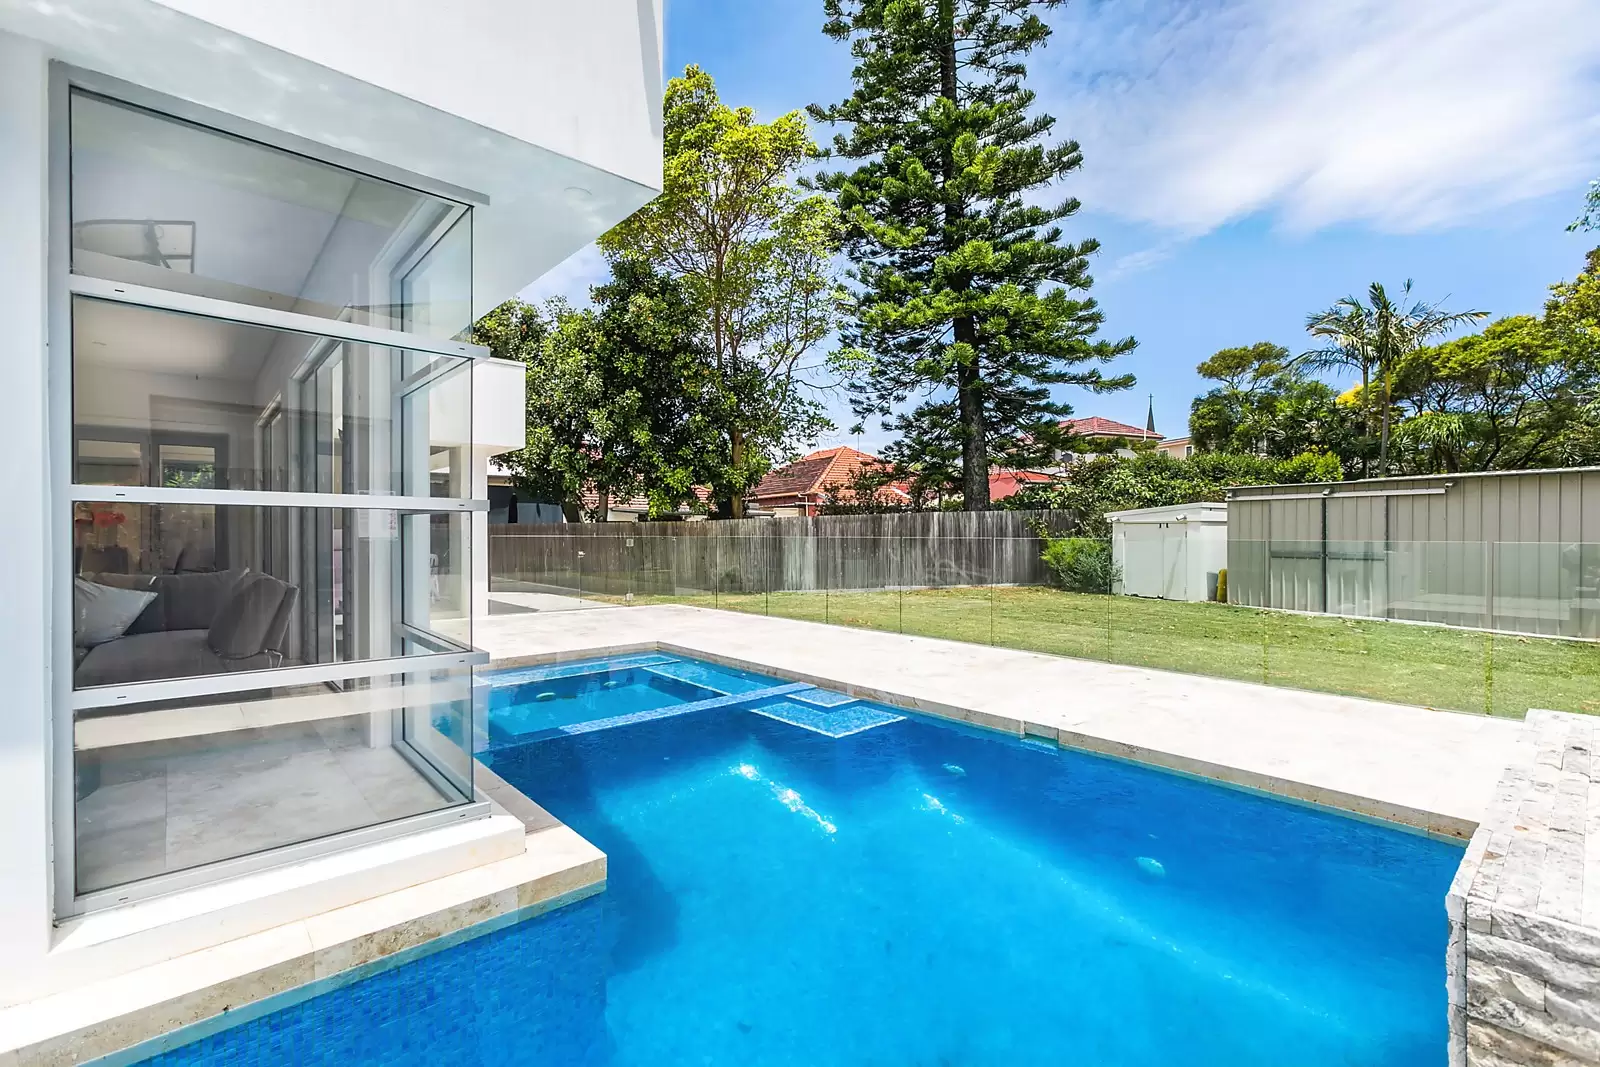 Photo #3: 21 Paine Street, Maroubra - Sold by Sydney Sotheby's International Realty